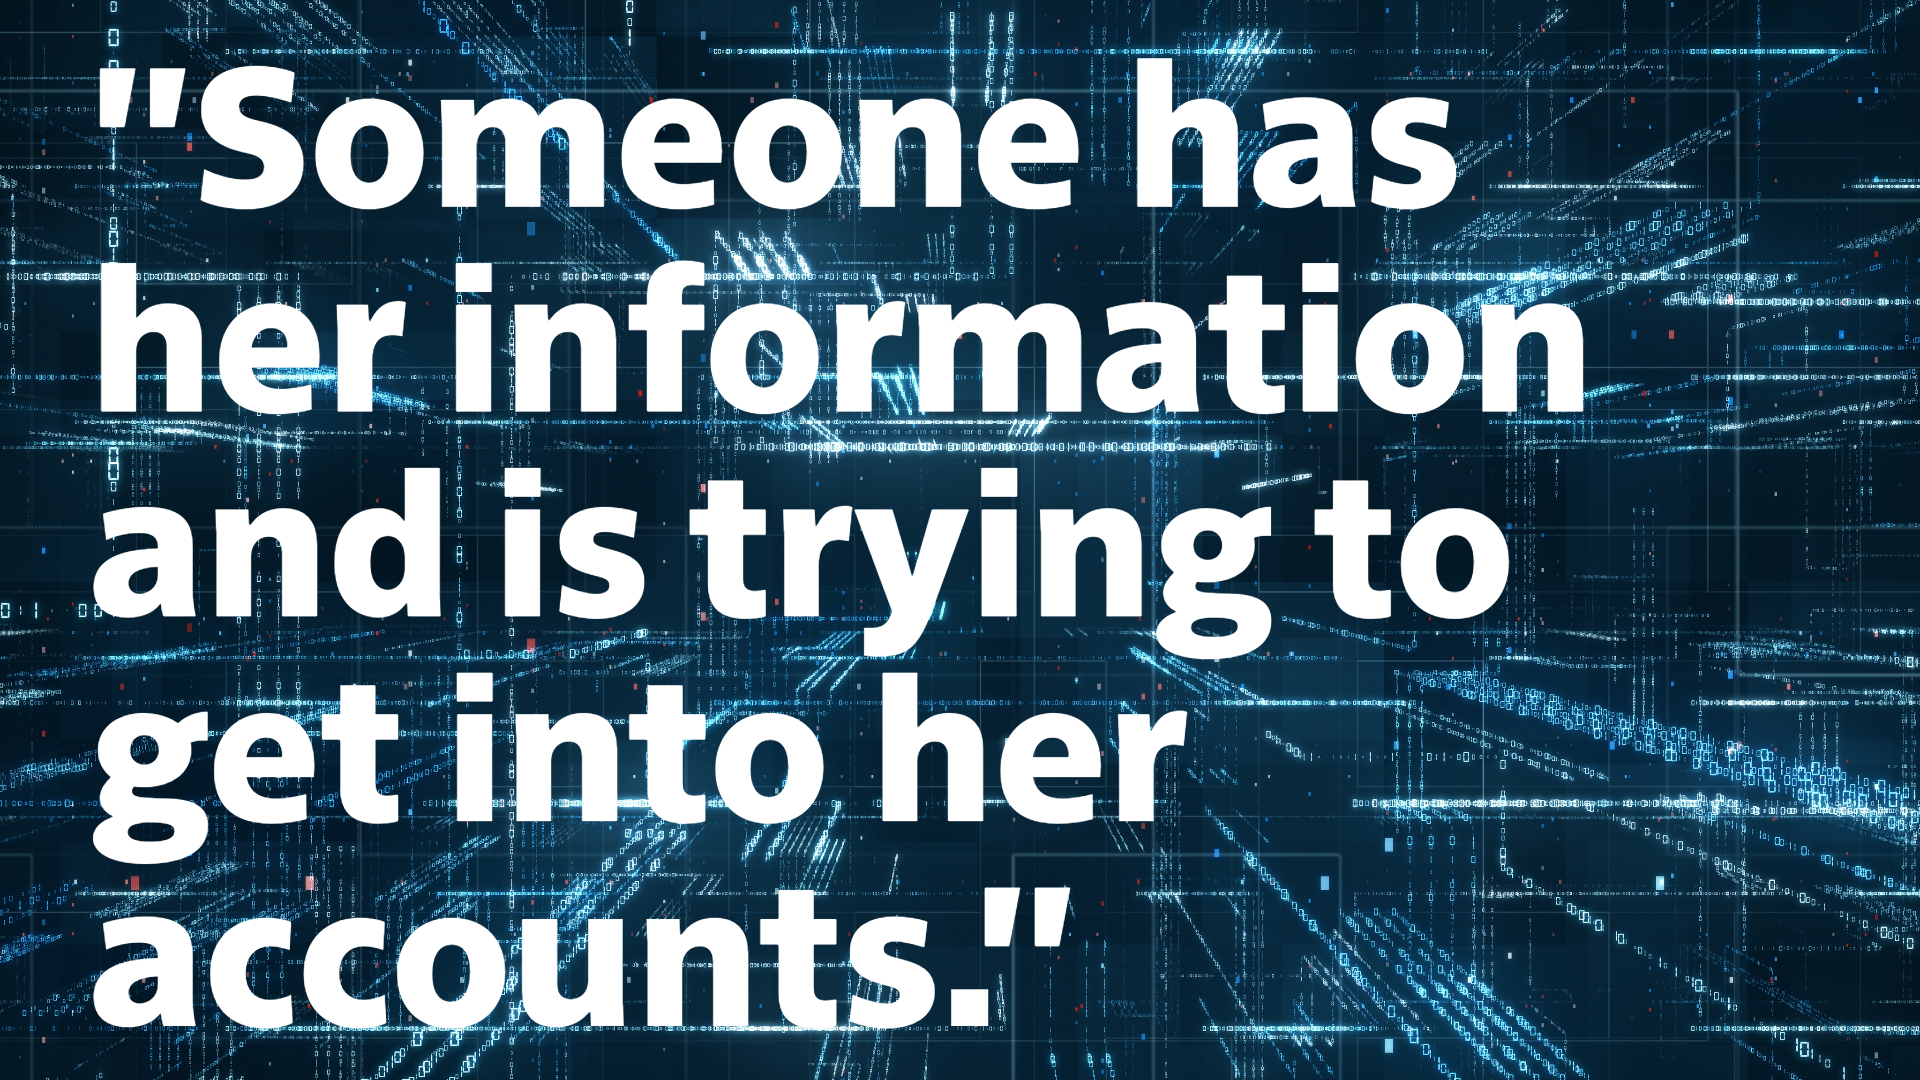 "Someone has her information and is trying to get into her accounts."